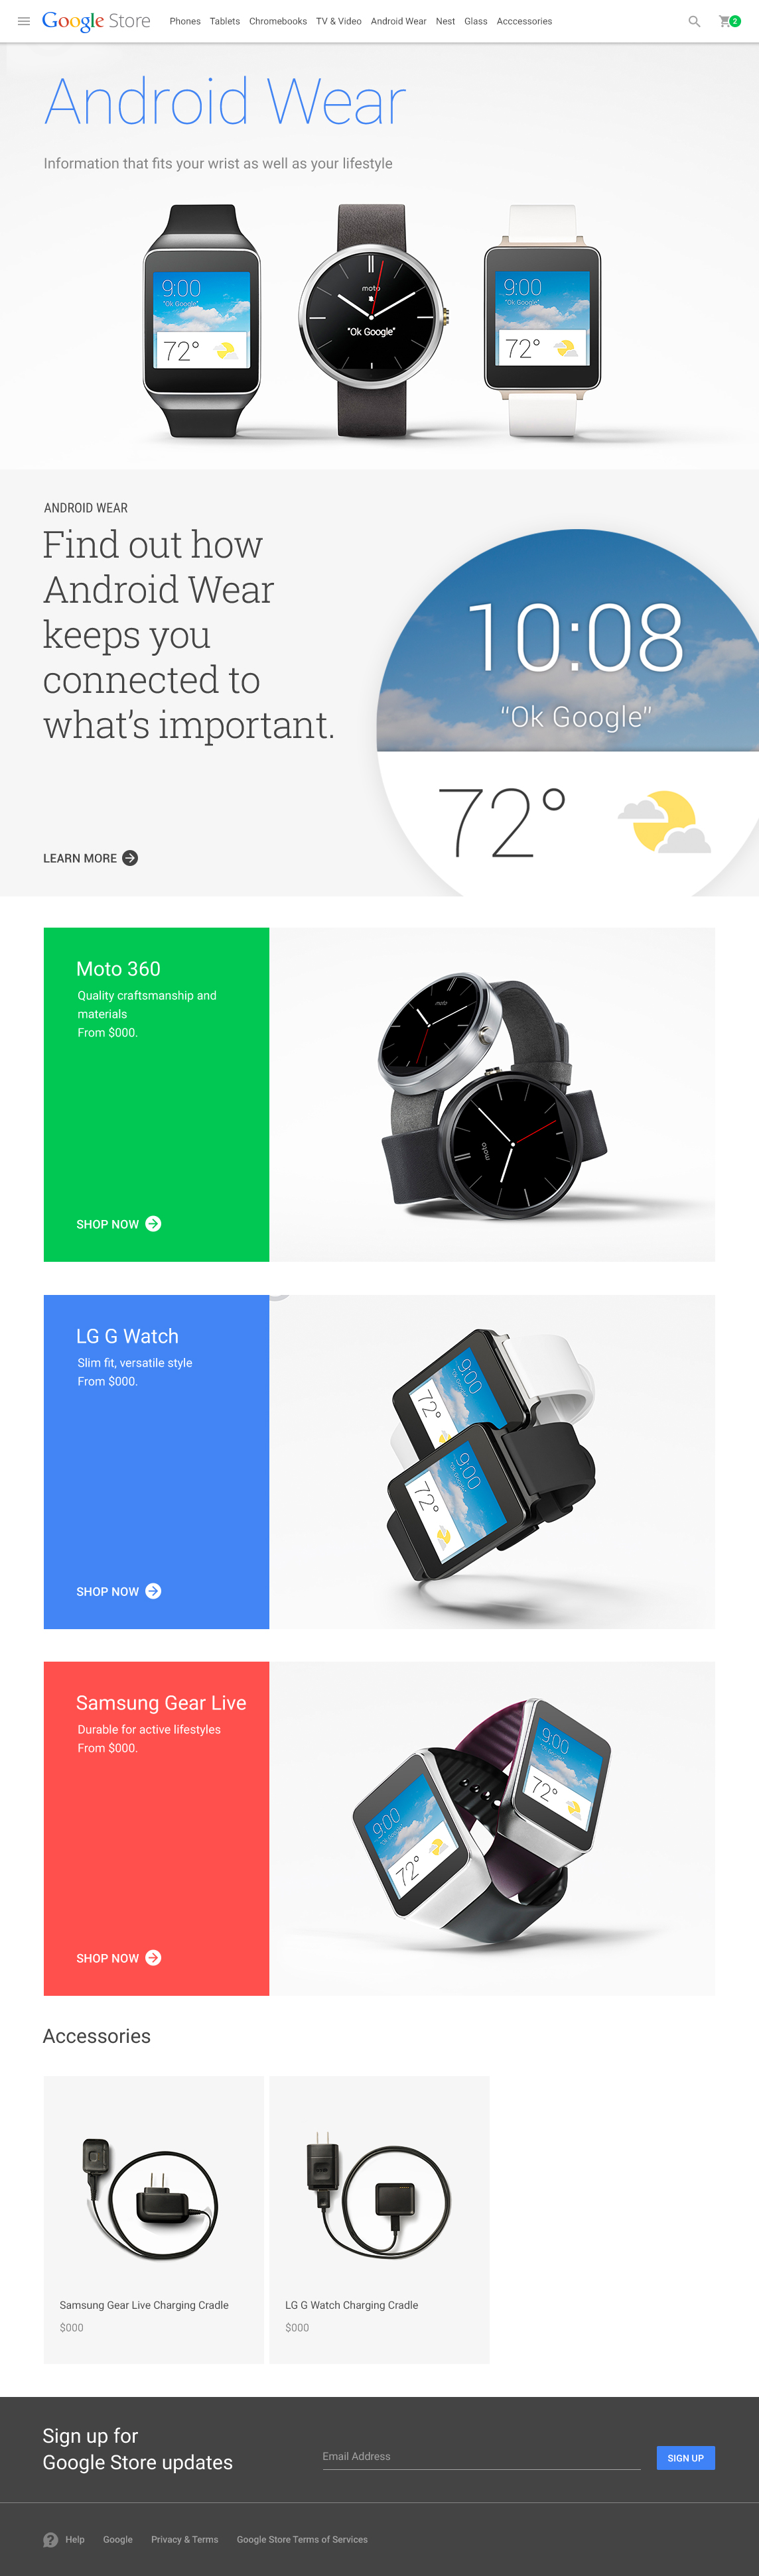 Android Wear Category Page